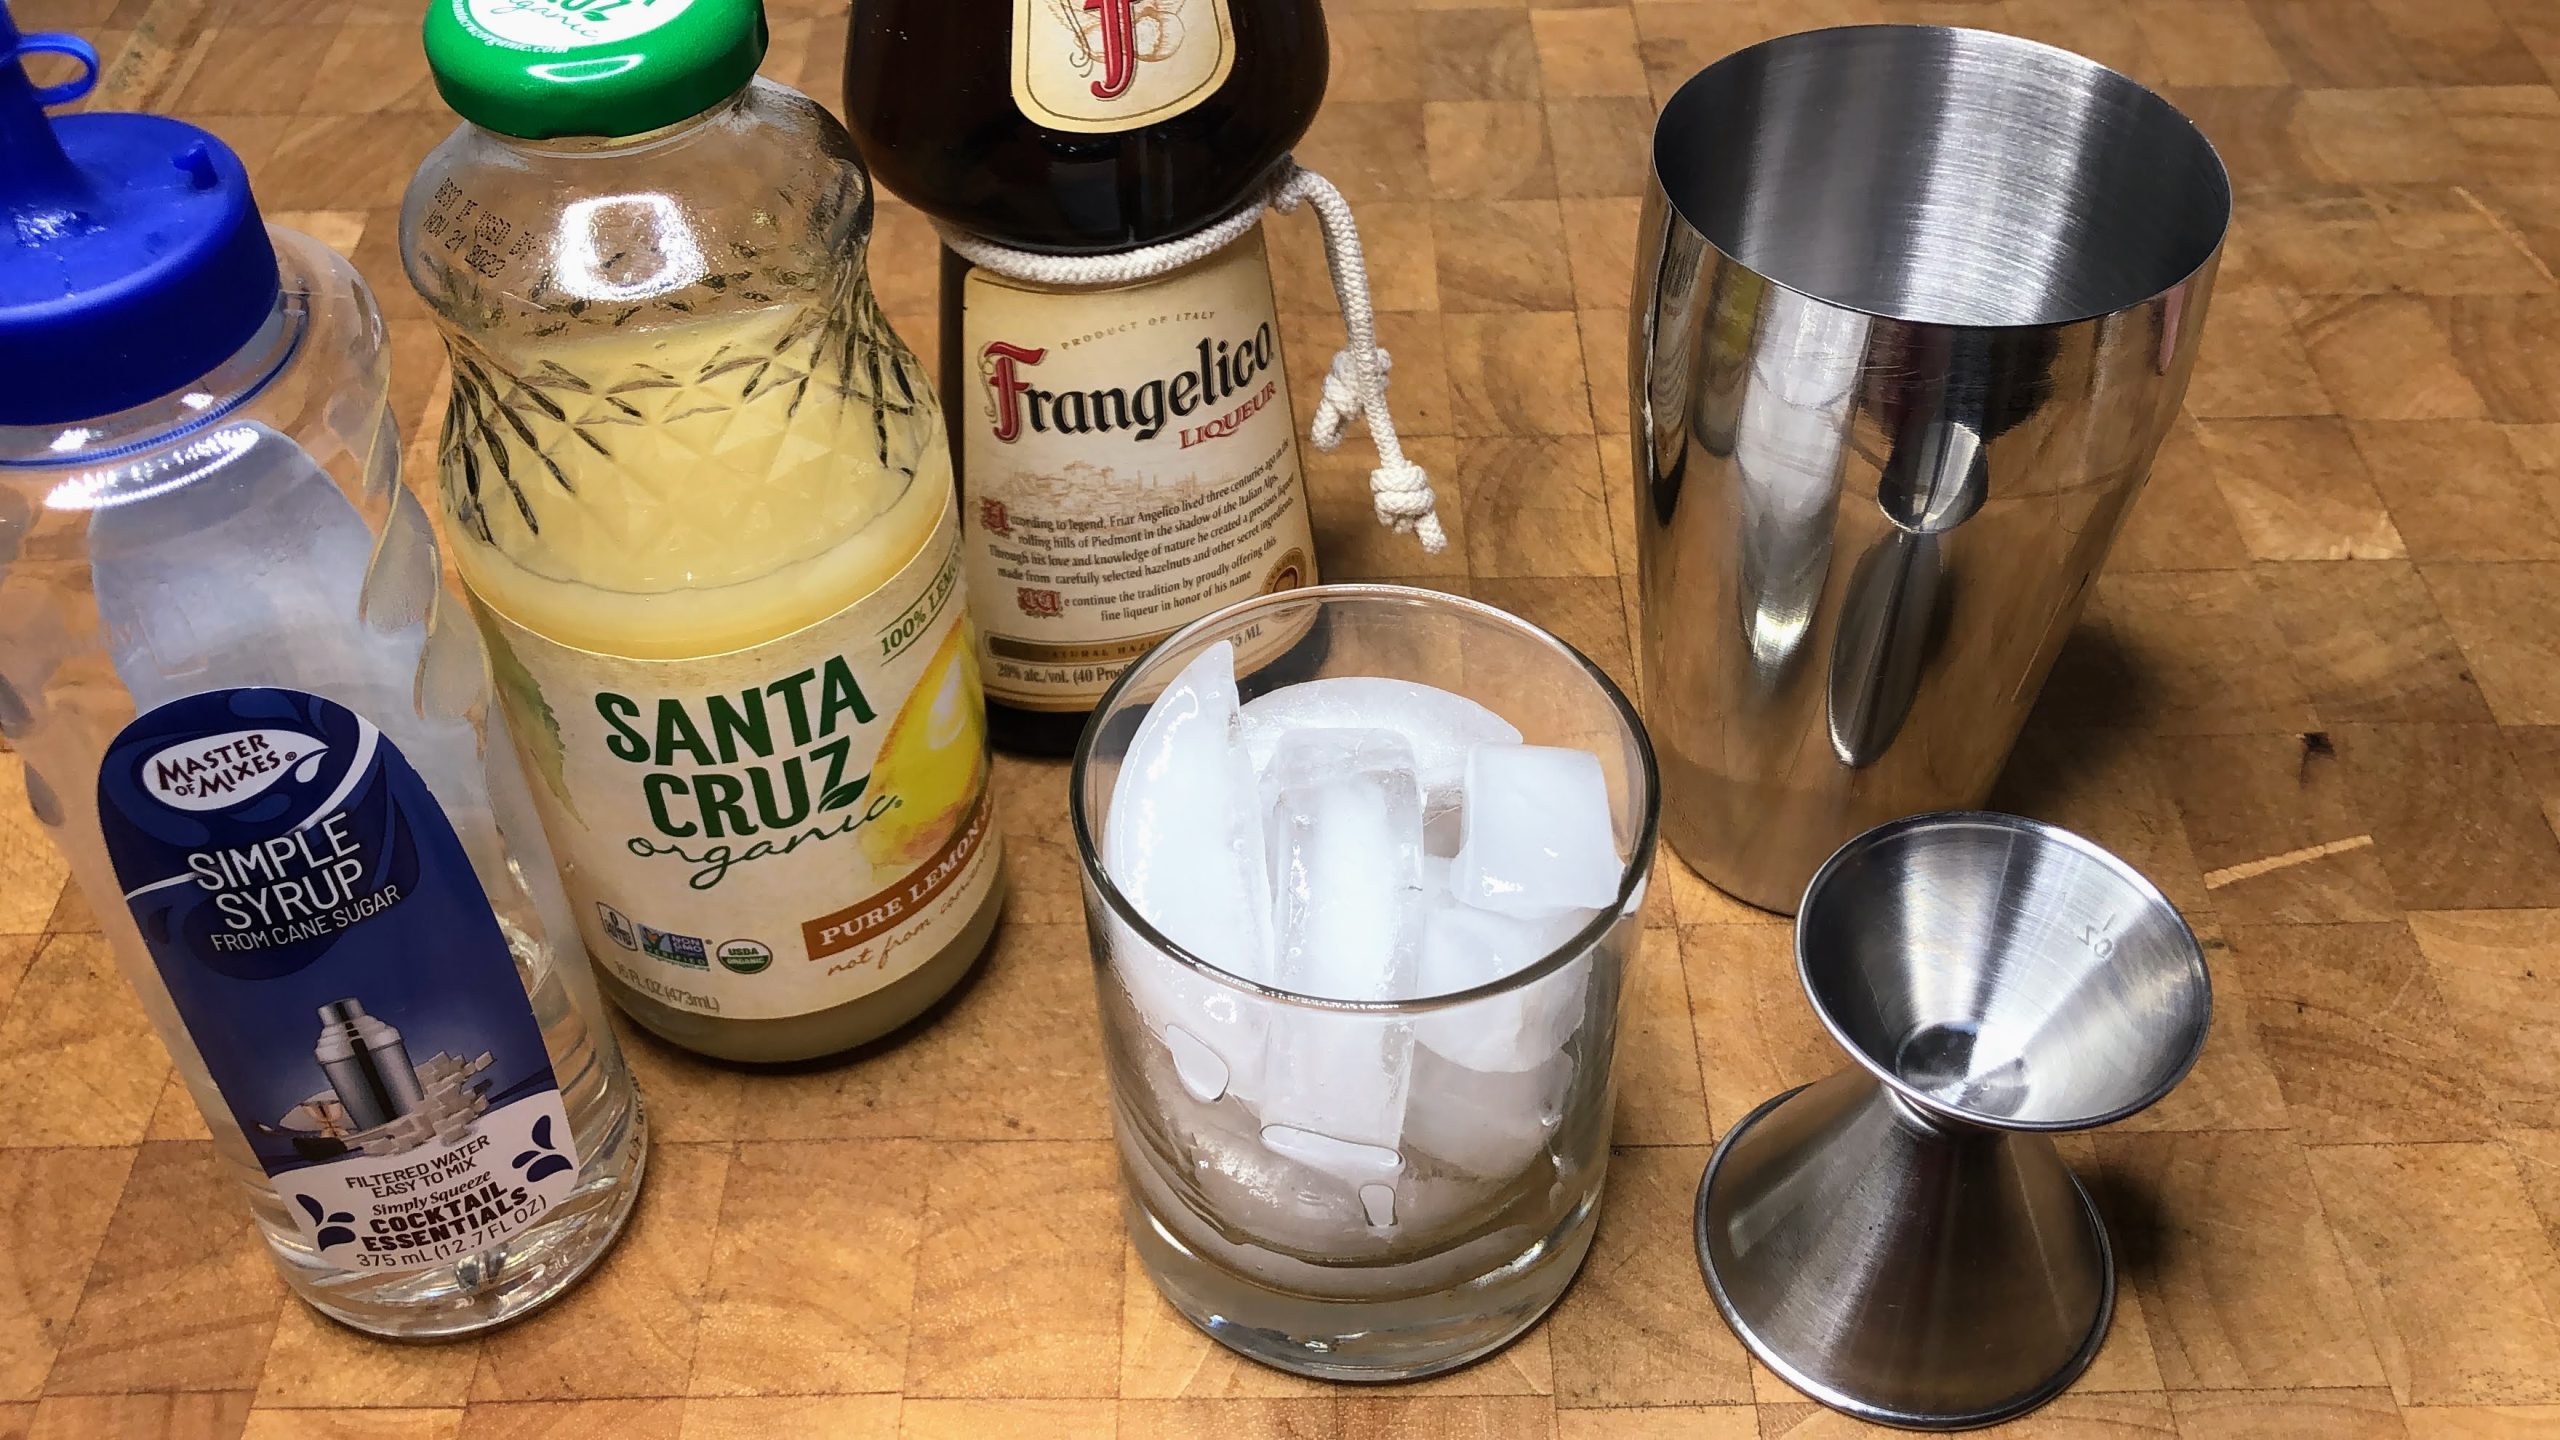 Bottles of simple syrup, lemon juice, frangelico next to a rocks glass, jigger and cocktail shaker.